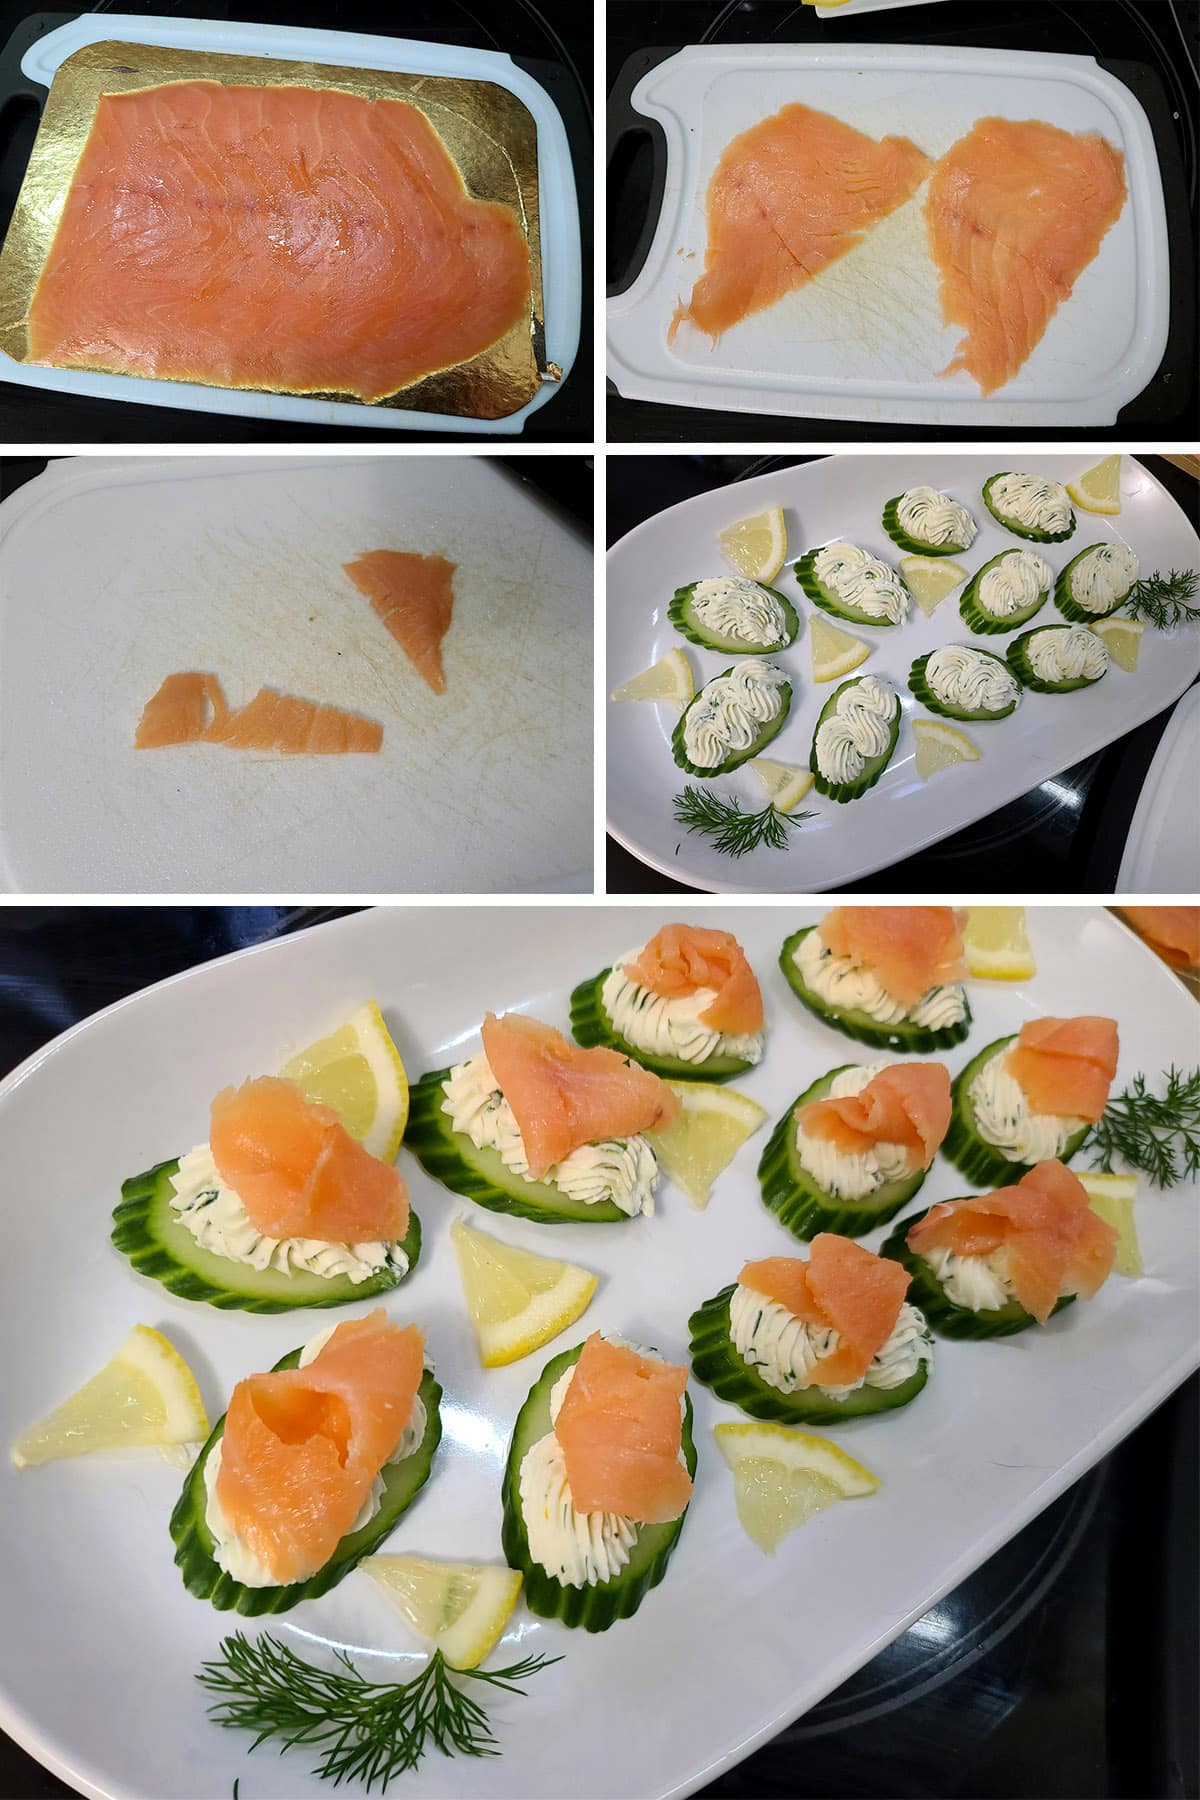 A 5 part image showing smoked salmon being cut into ribbons and arranged on the cream cheese topped cucumber slices.